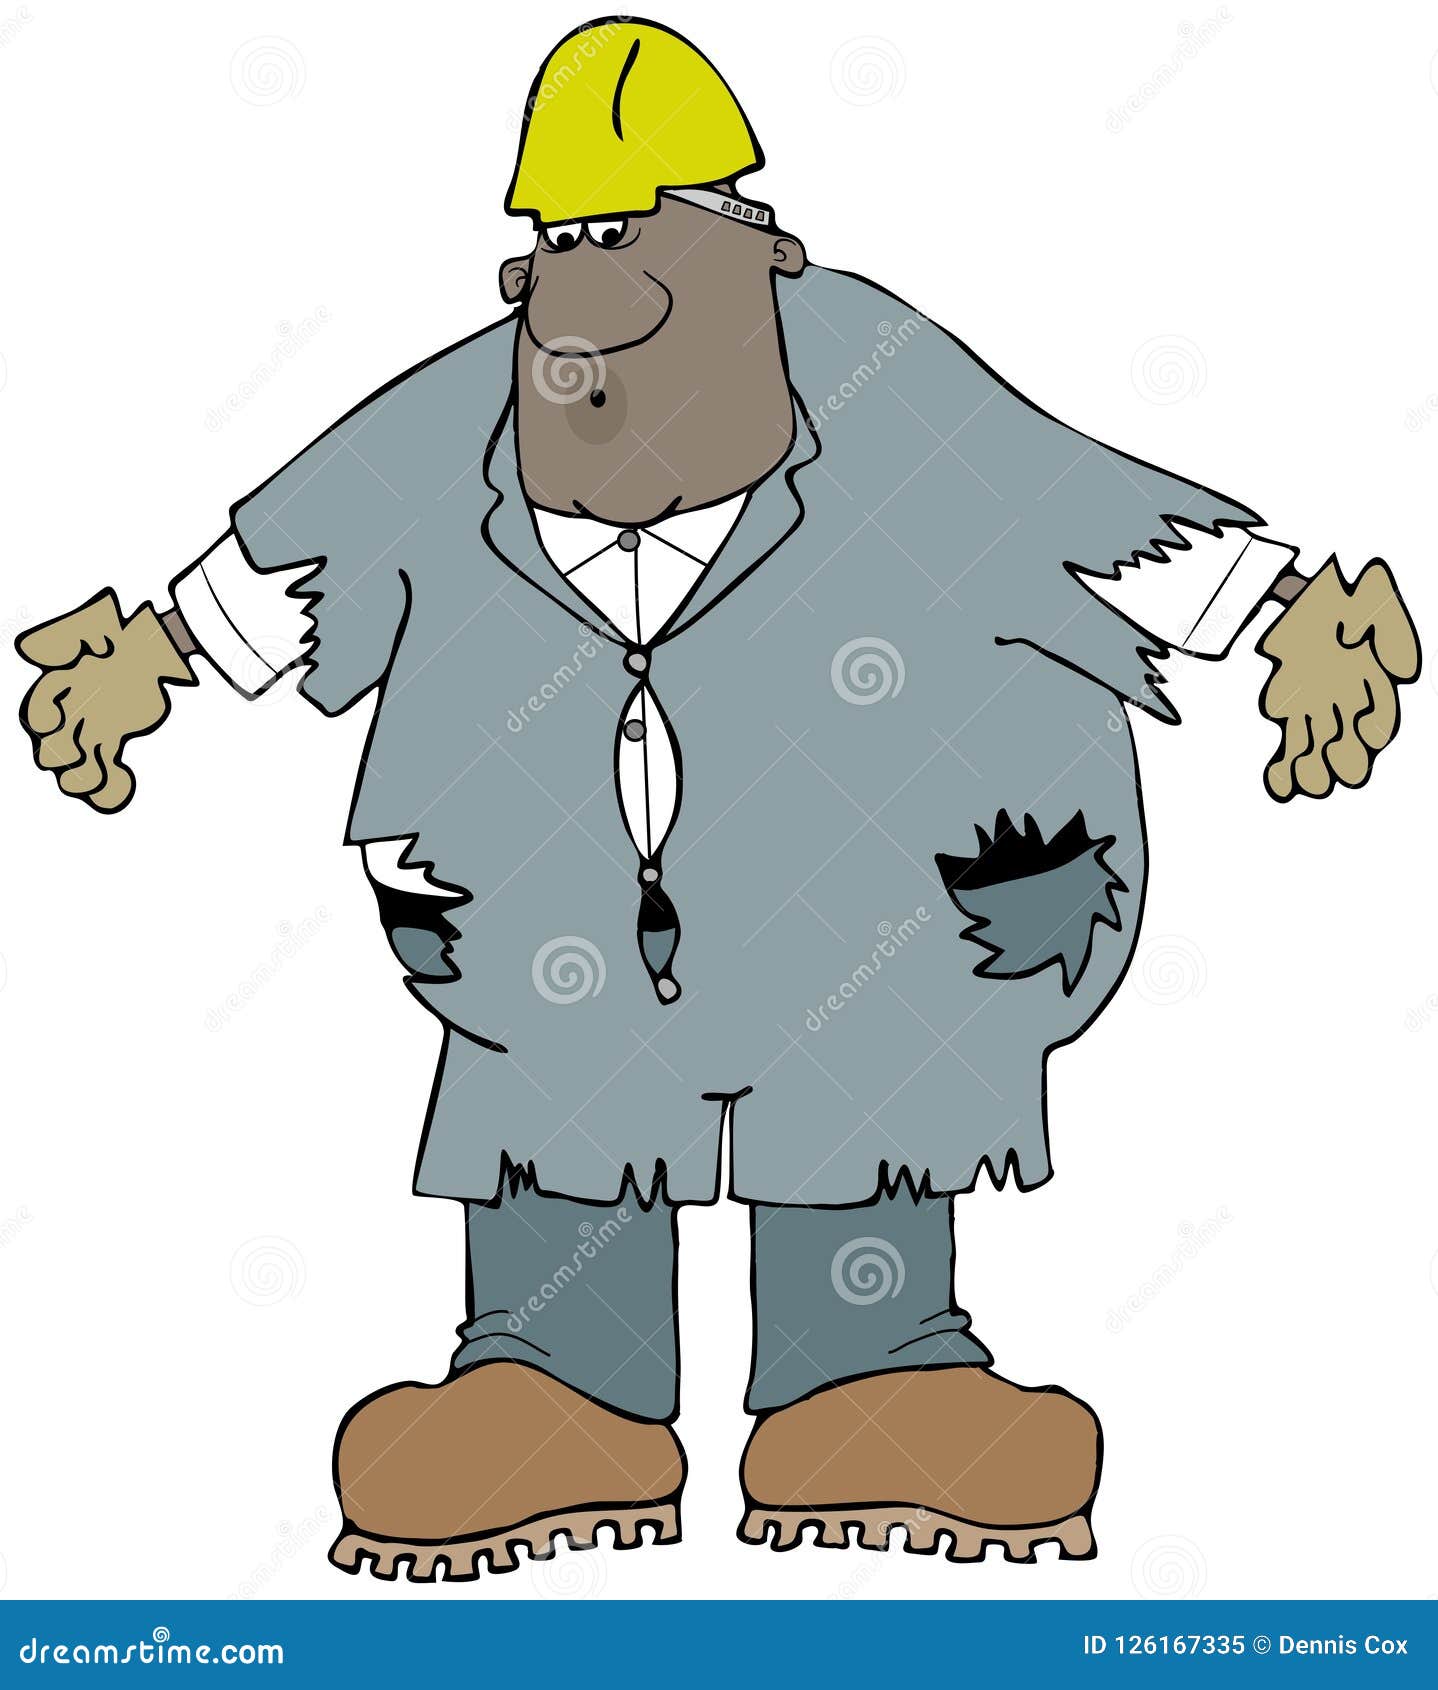 large construction worker wearing old, tattered coveralls